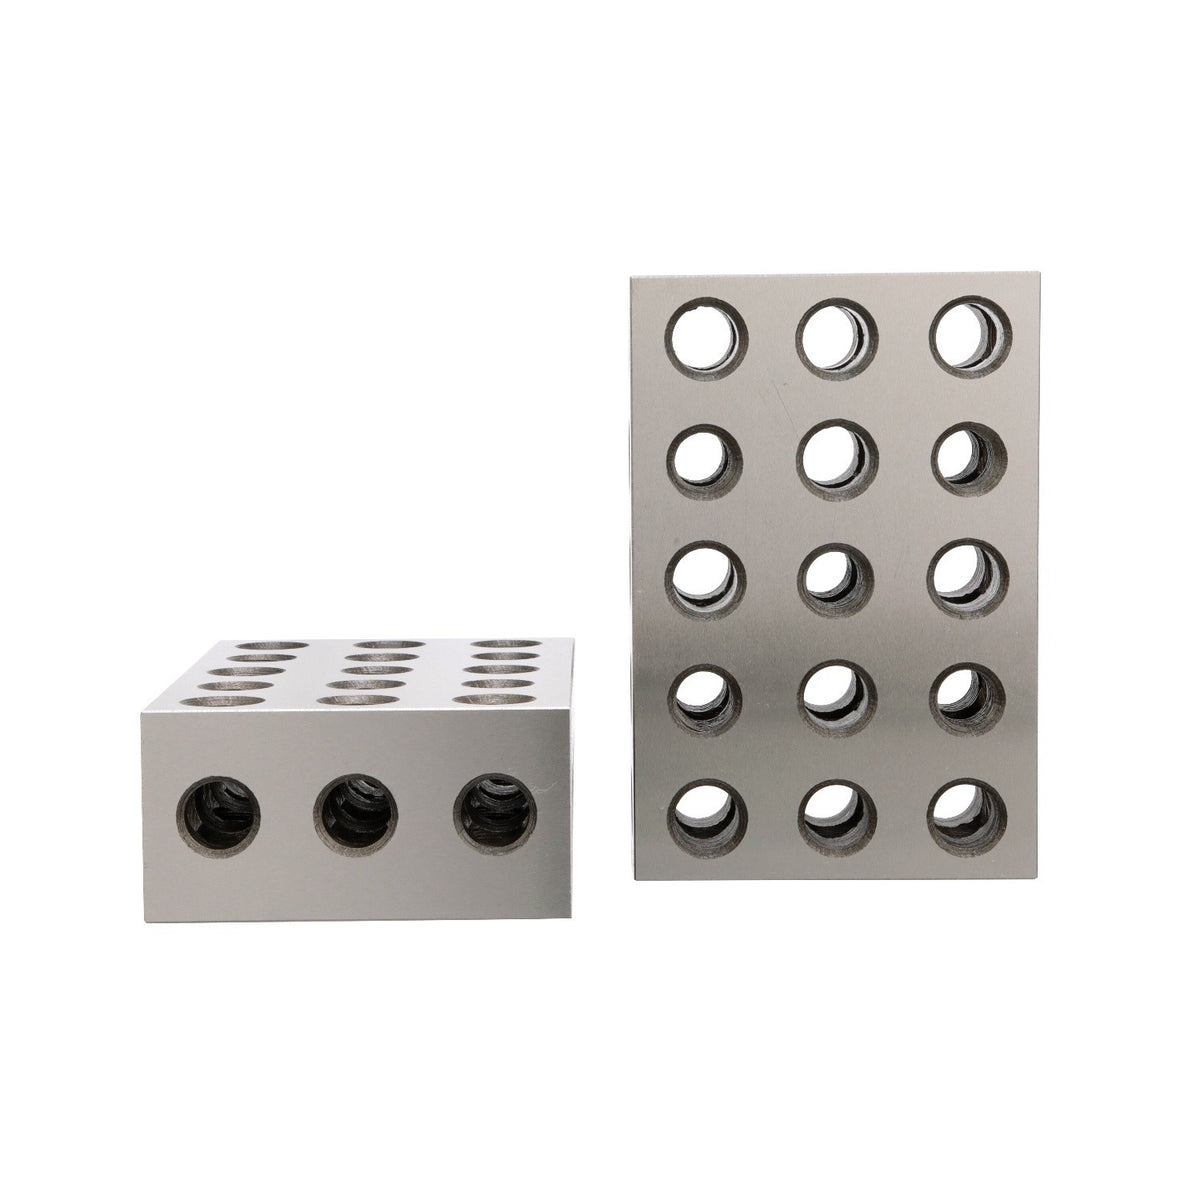 3 X 2.5 X 2" ANGLE PLATE & 1-2-3 BLOCK SET MATCHED PAIR